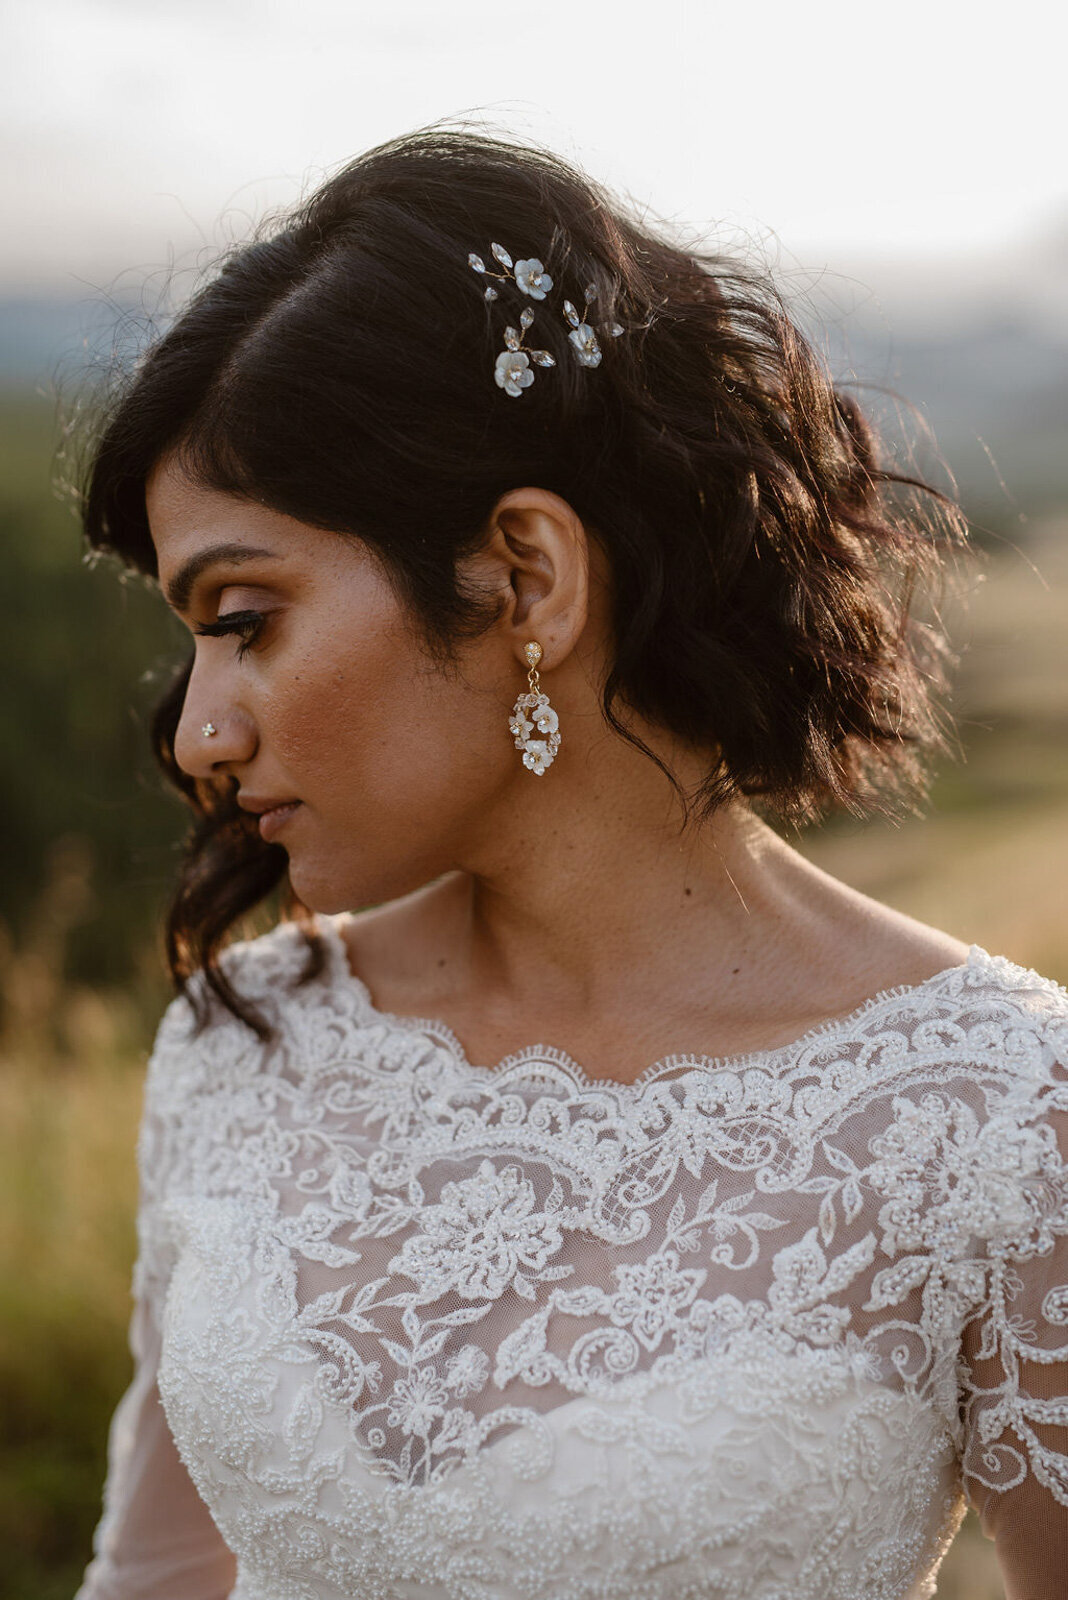 Stunning gold bridal earrings with white flowers, by Joanna Bisley Designs, romantic and modern wedding jeweller based in Calgary, Alberta. Featured on the Brontë Bride Vendor Guide.